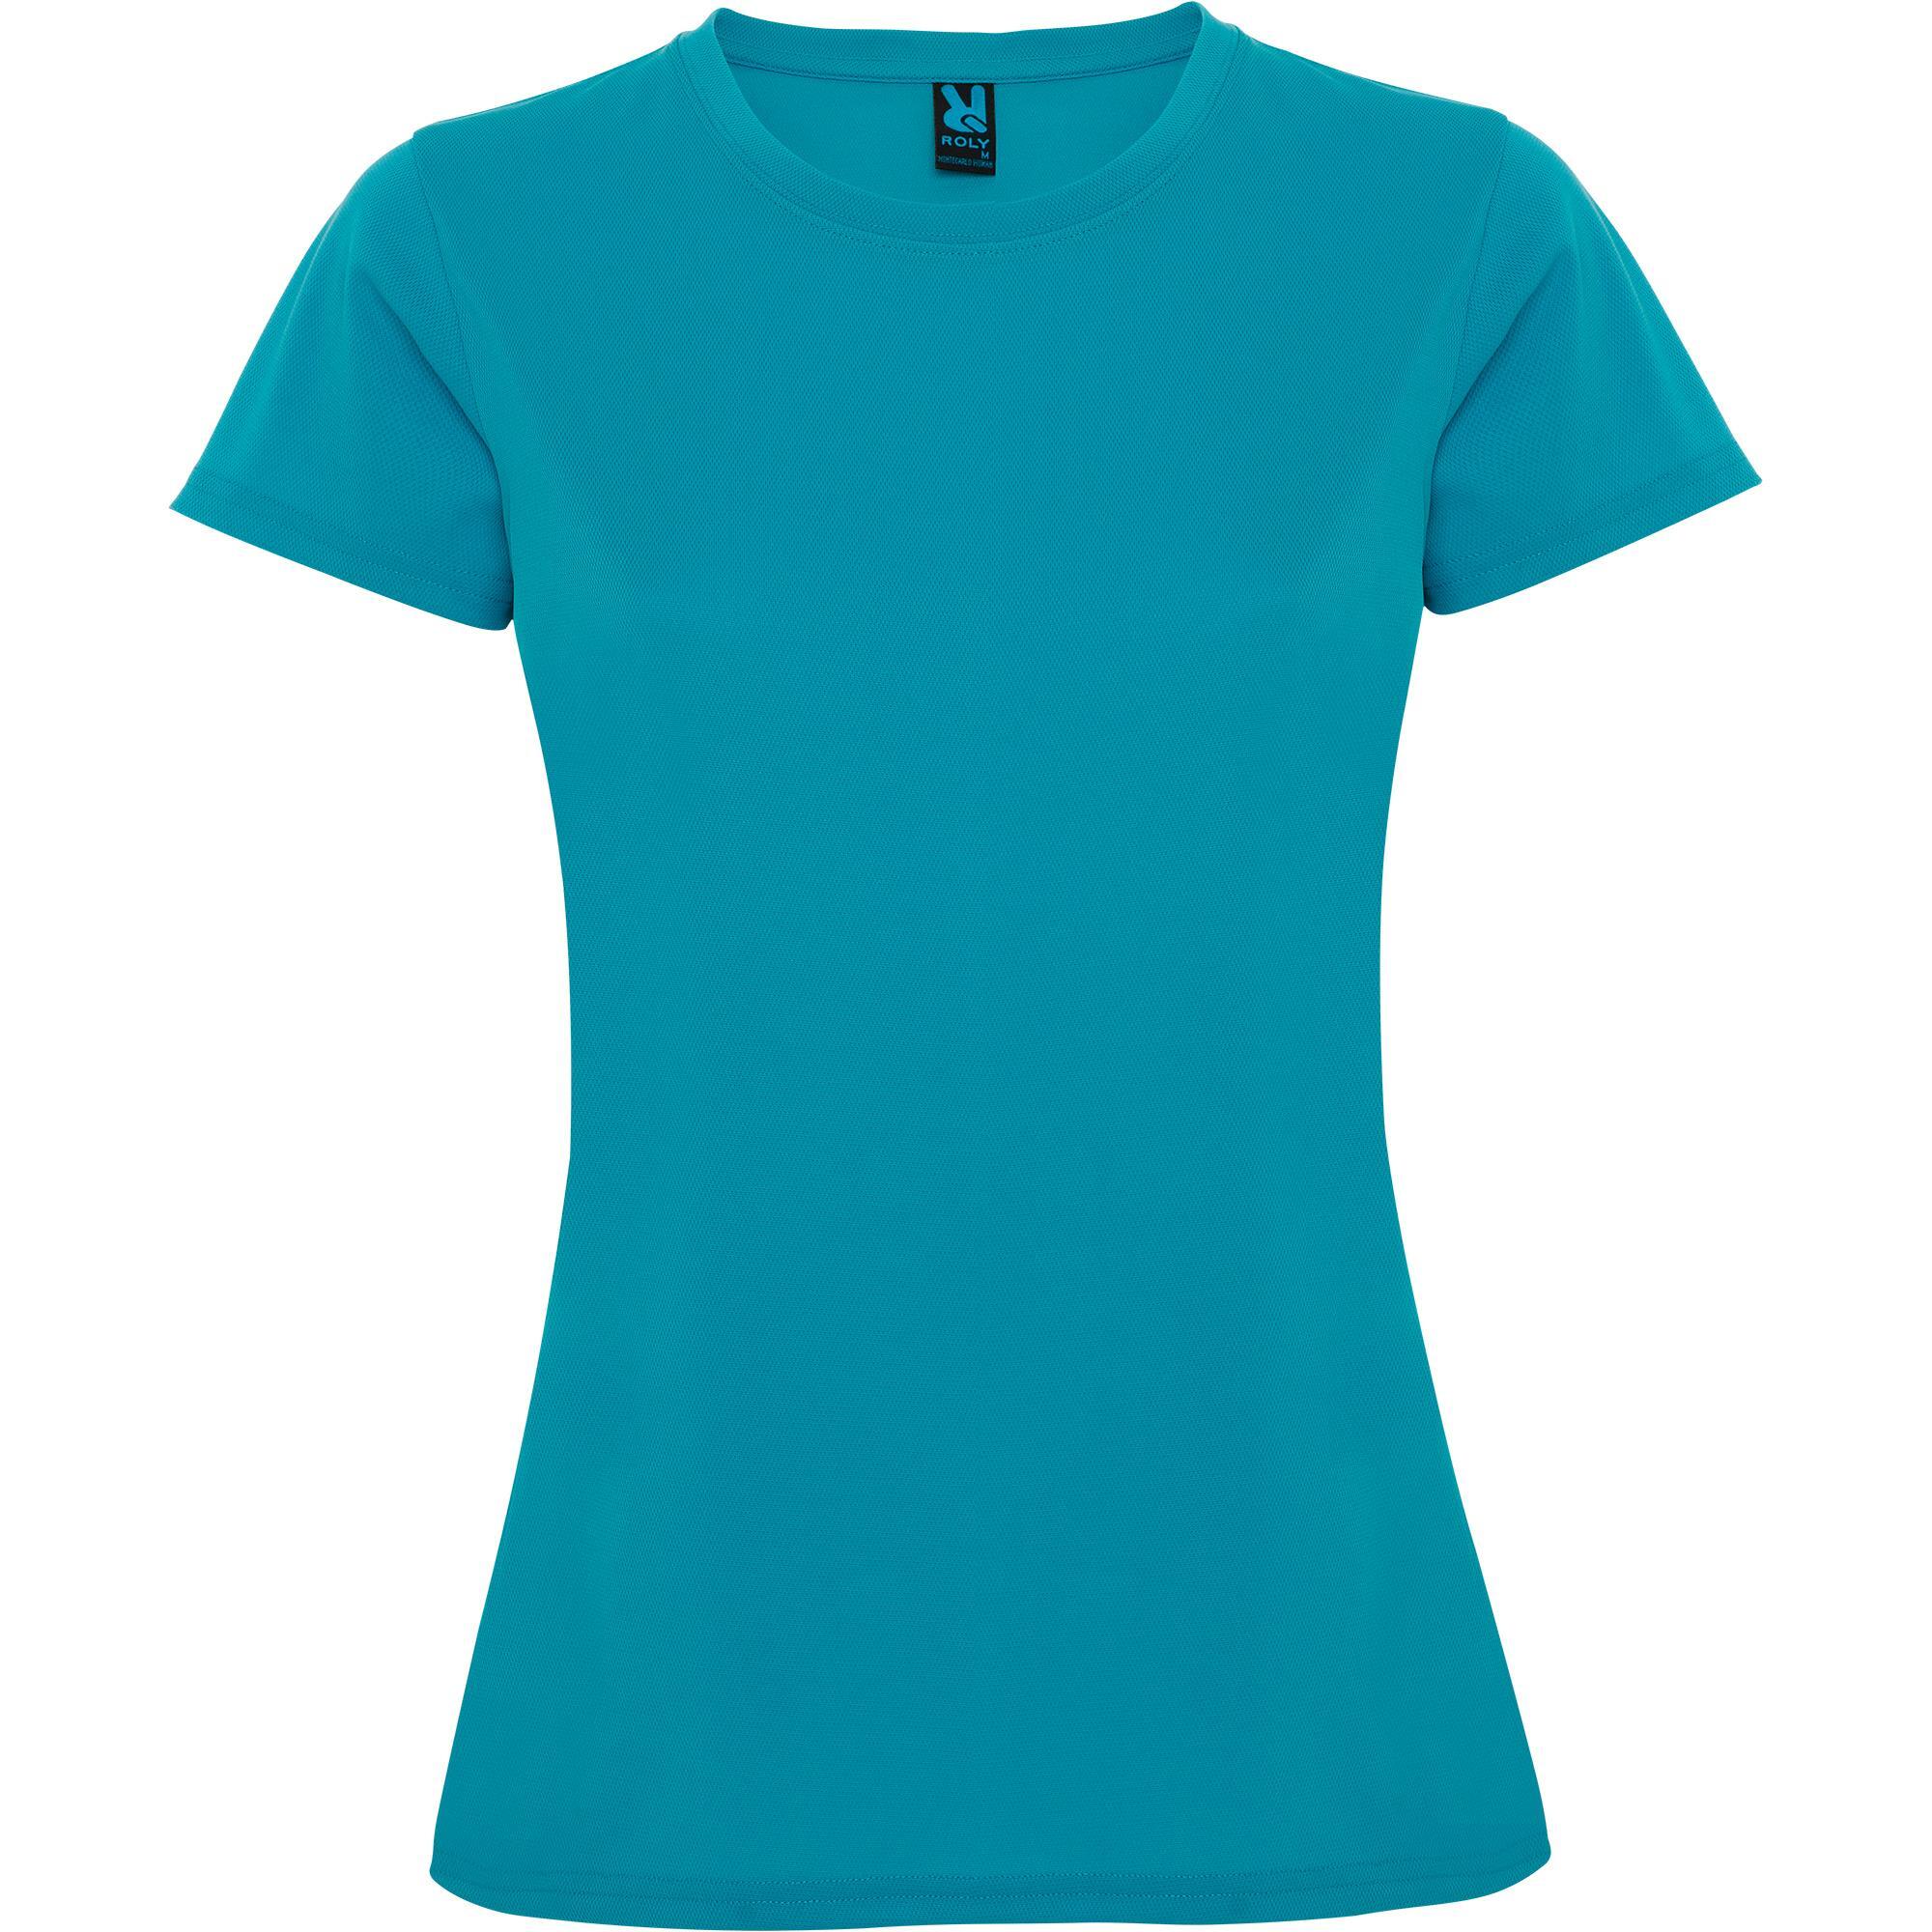 Sport Shirtje dames turquoise